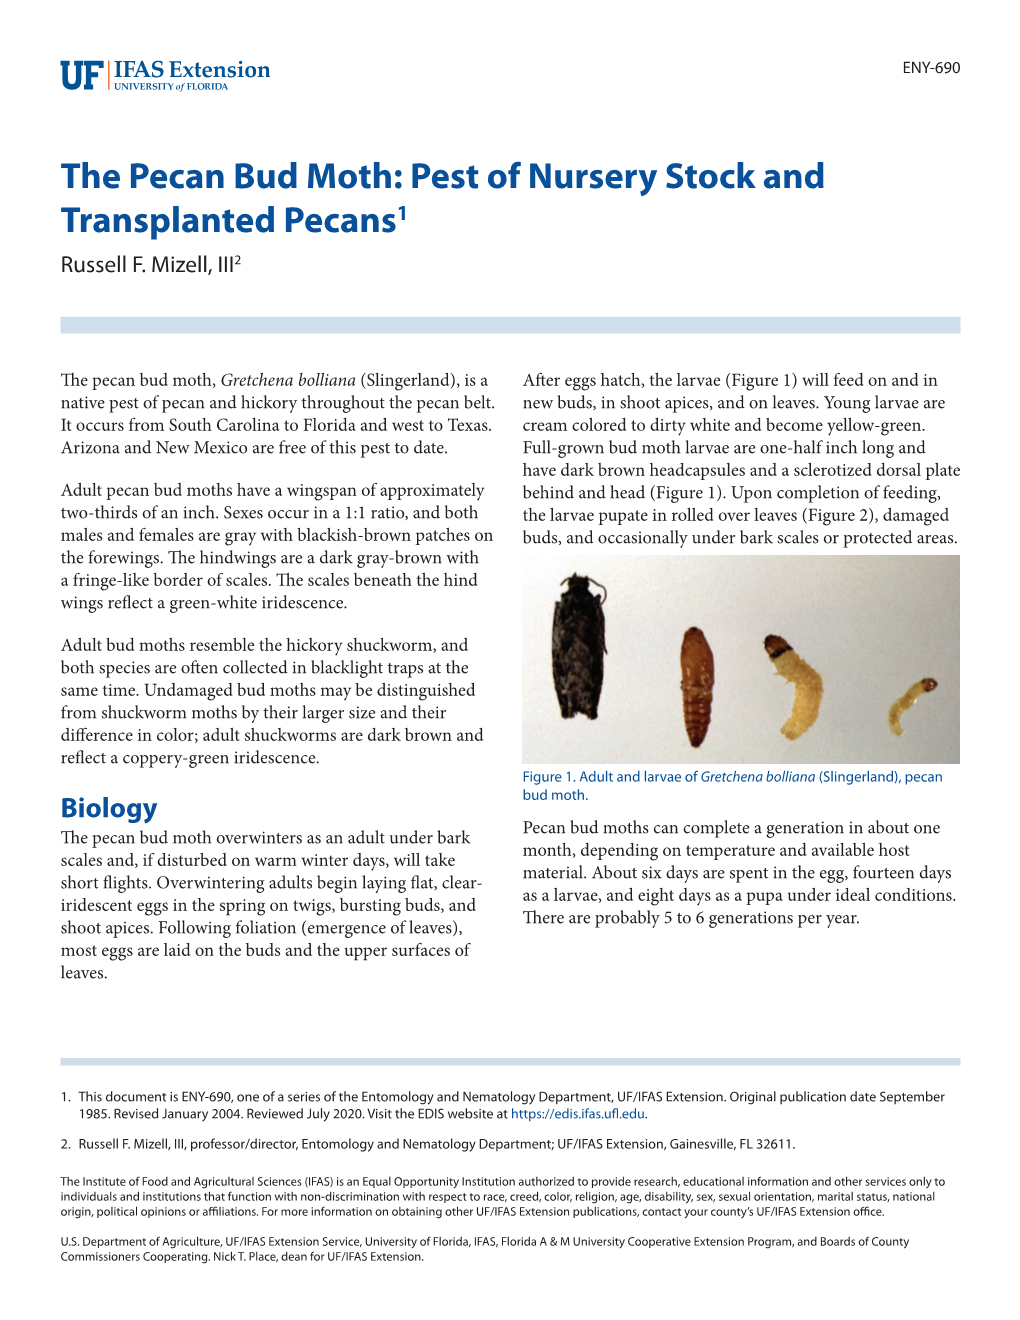 The Pecan Bud Moth: Pest of Nursery Stock and Transplanted Pecans1 Russell F